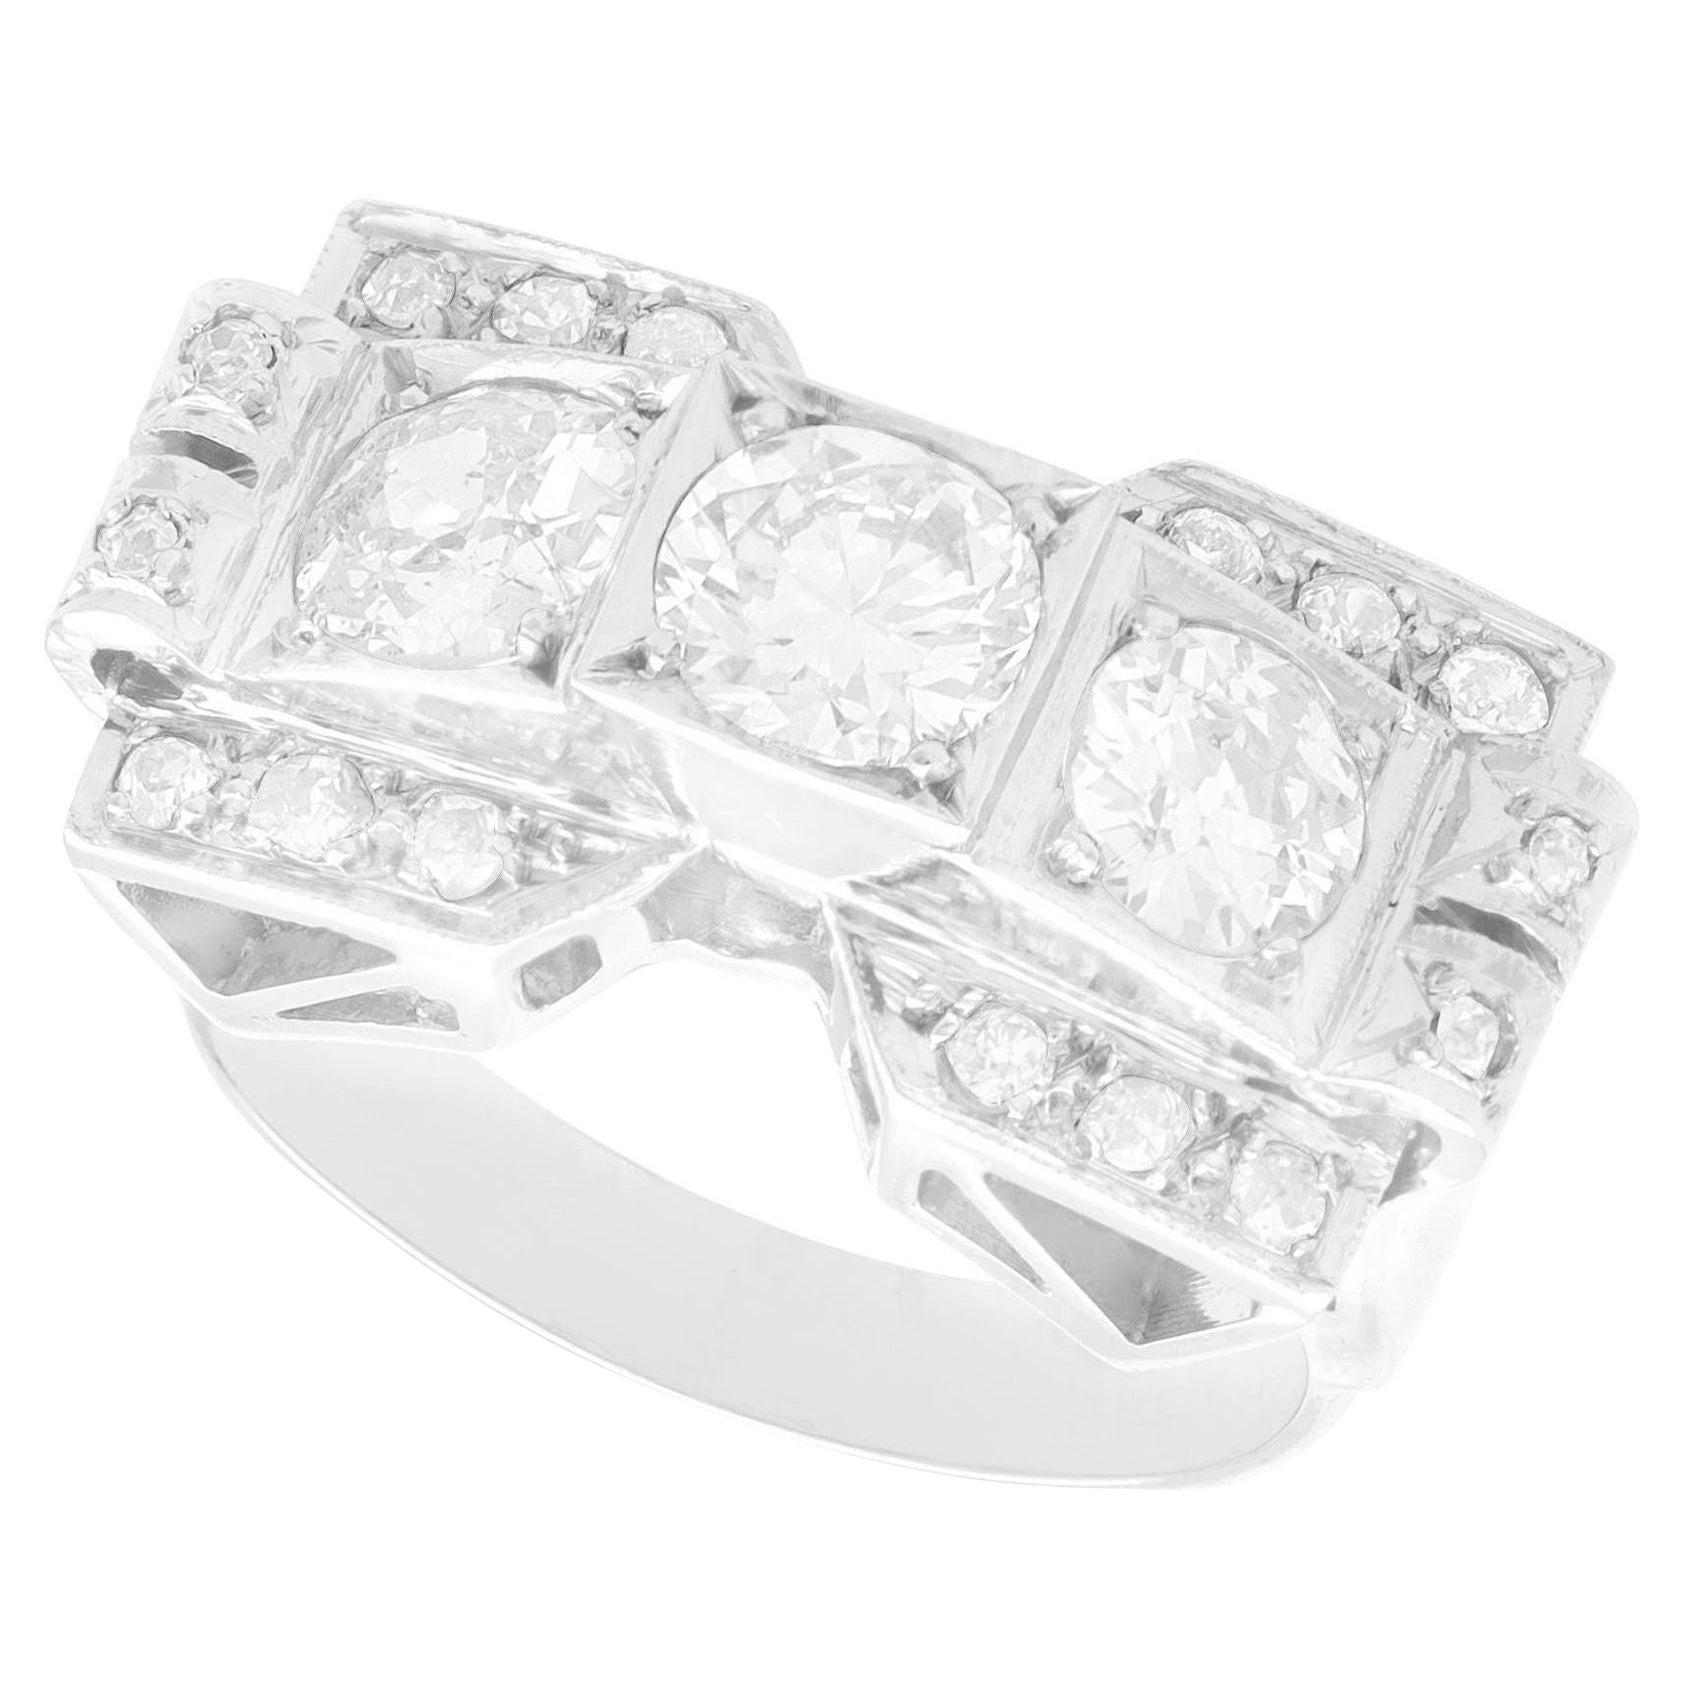 Antique Art Deco 2.18 Carat Diamond and White Gold Dress Ring For Sale